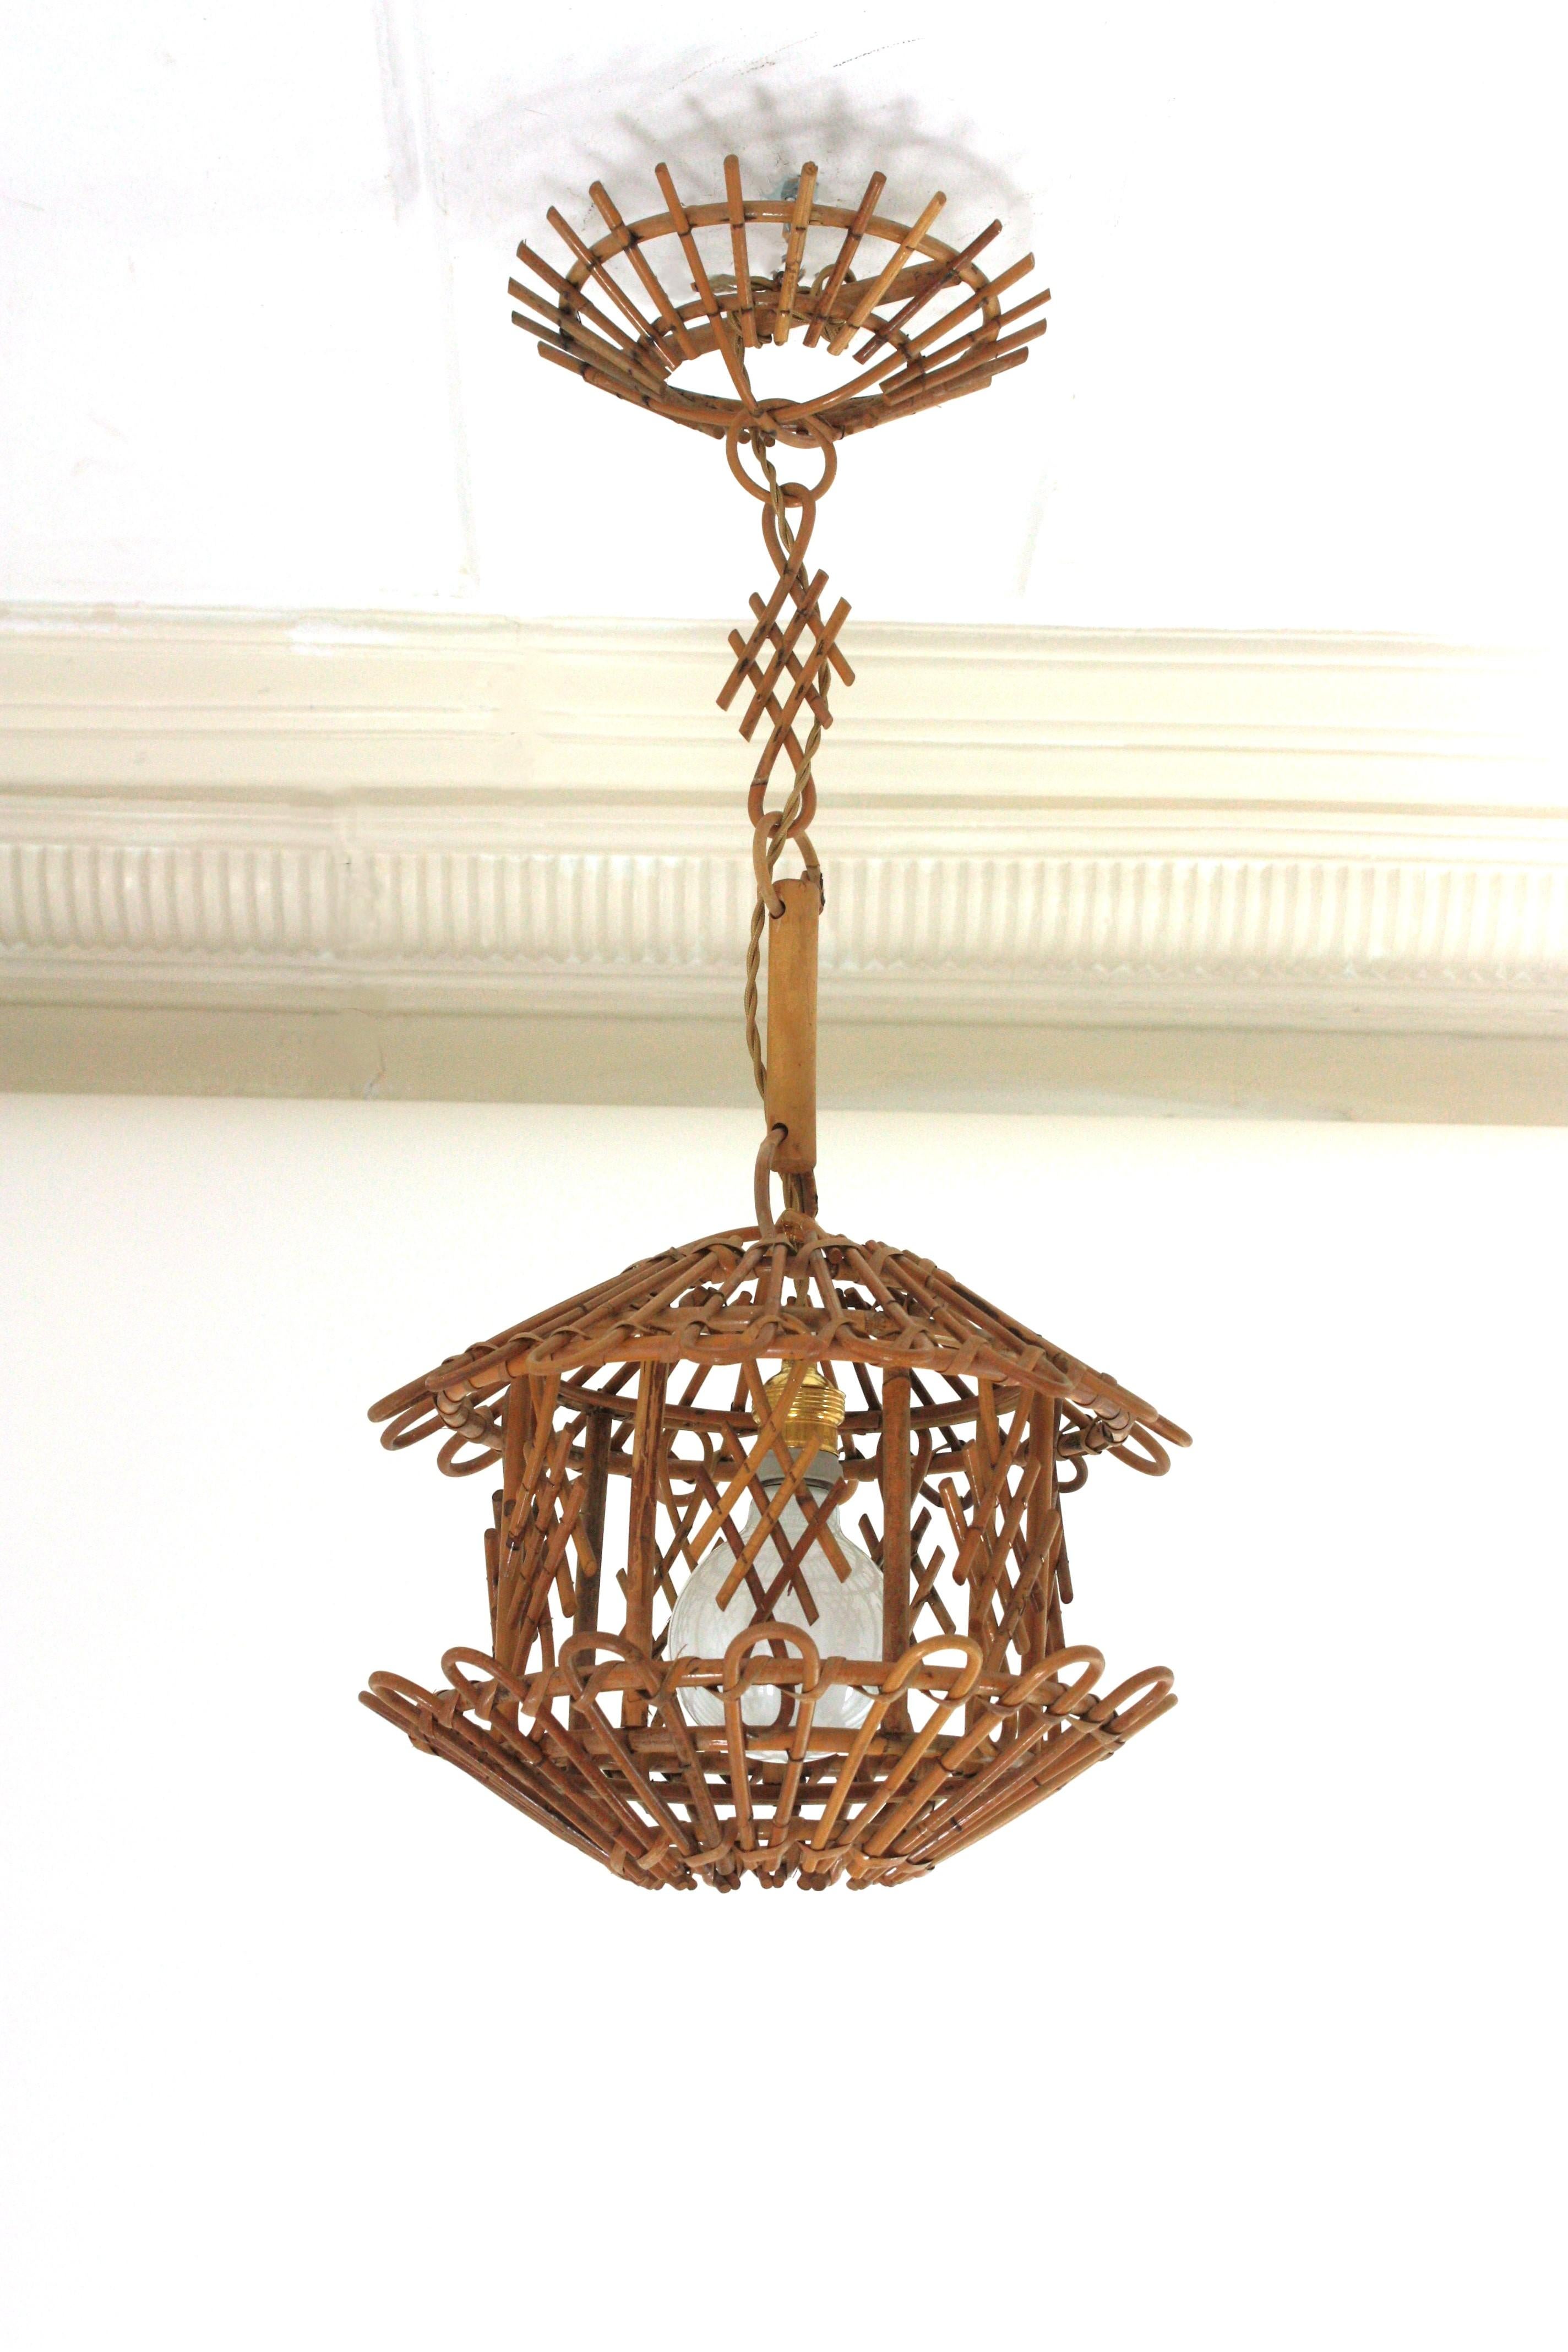 French Modernist Rattan Pendant Lantern / Hanging Light with Chinoiserie Accents For Sale 4